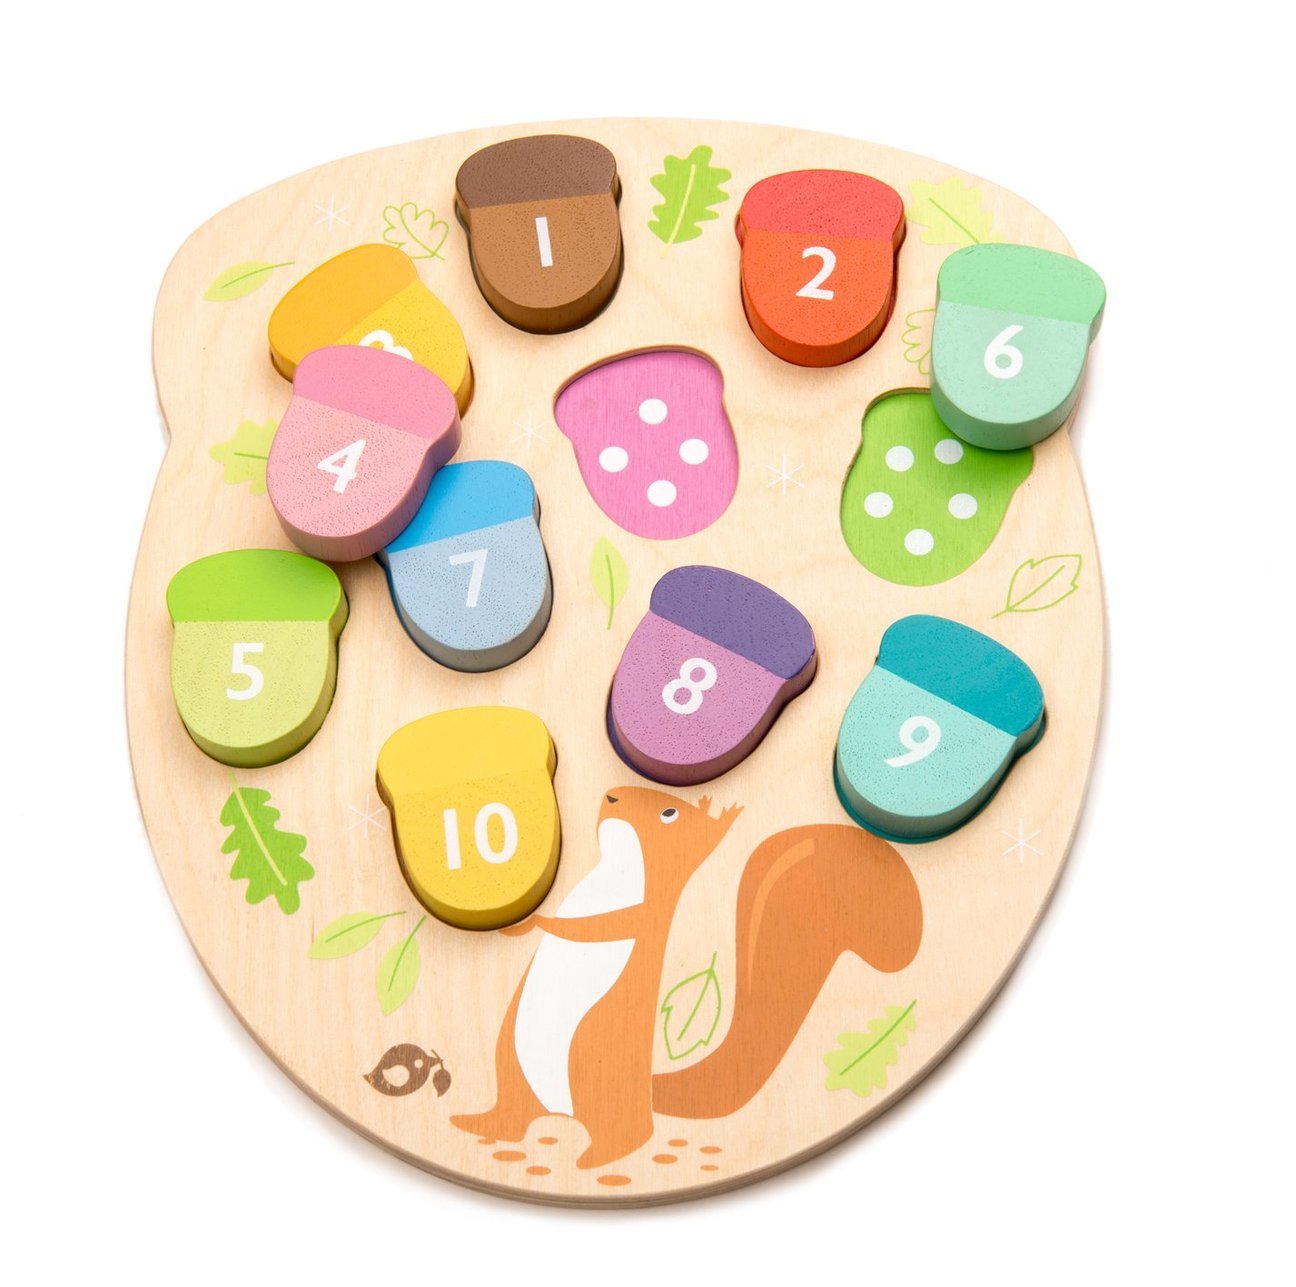 How Many Acorns? Wooden Puzzle